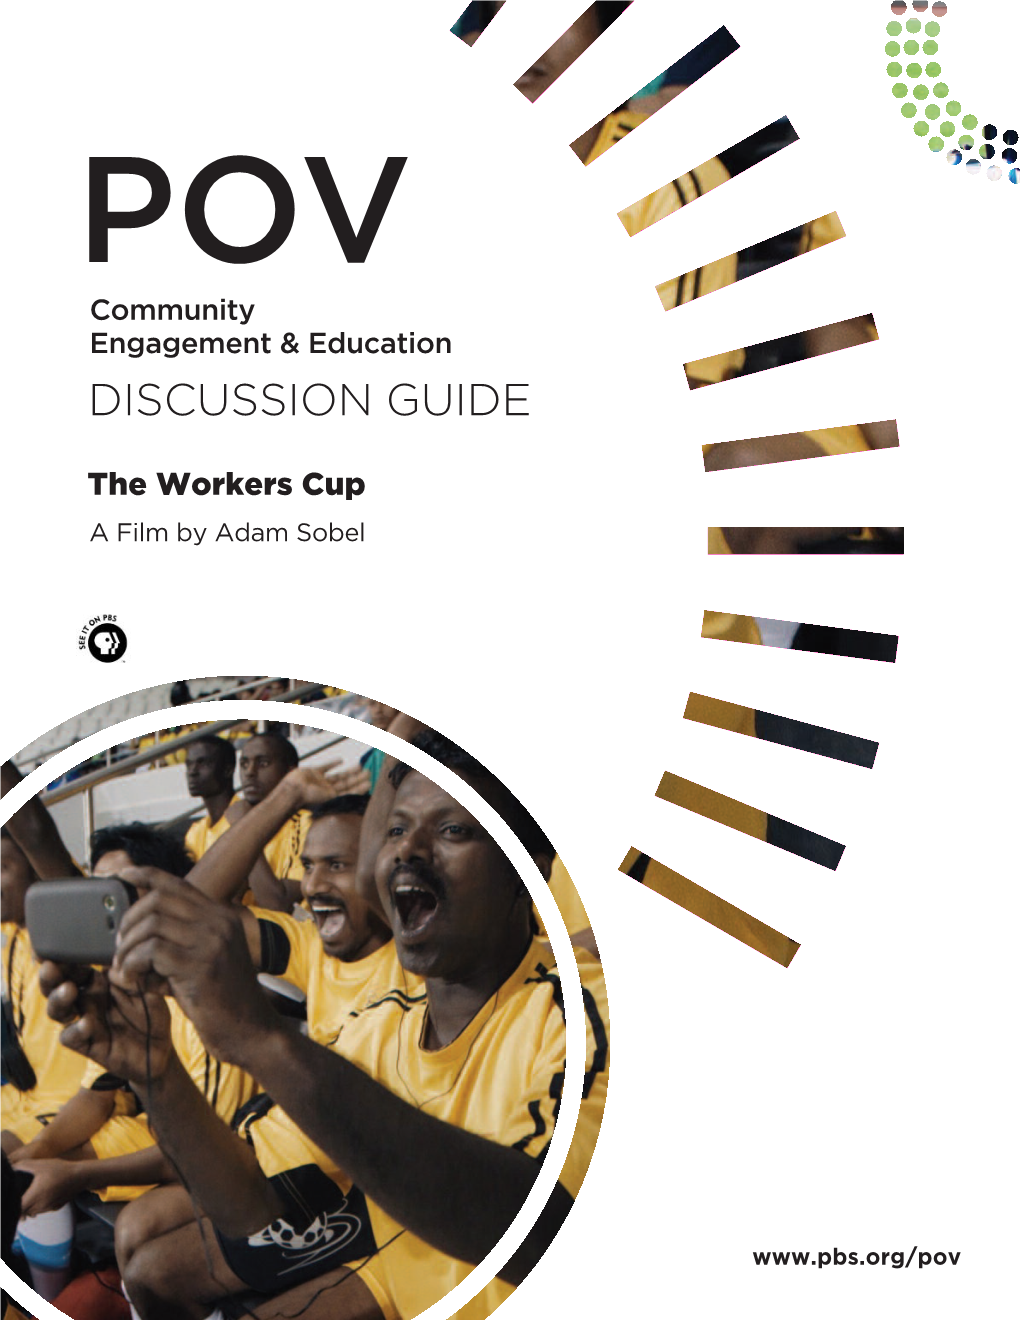 Download the Discussion Guide for the Workers